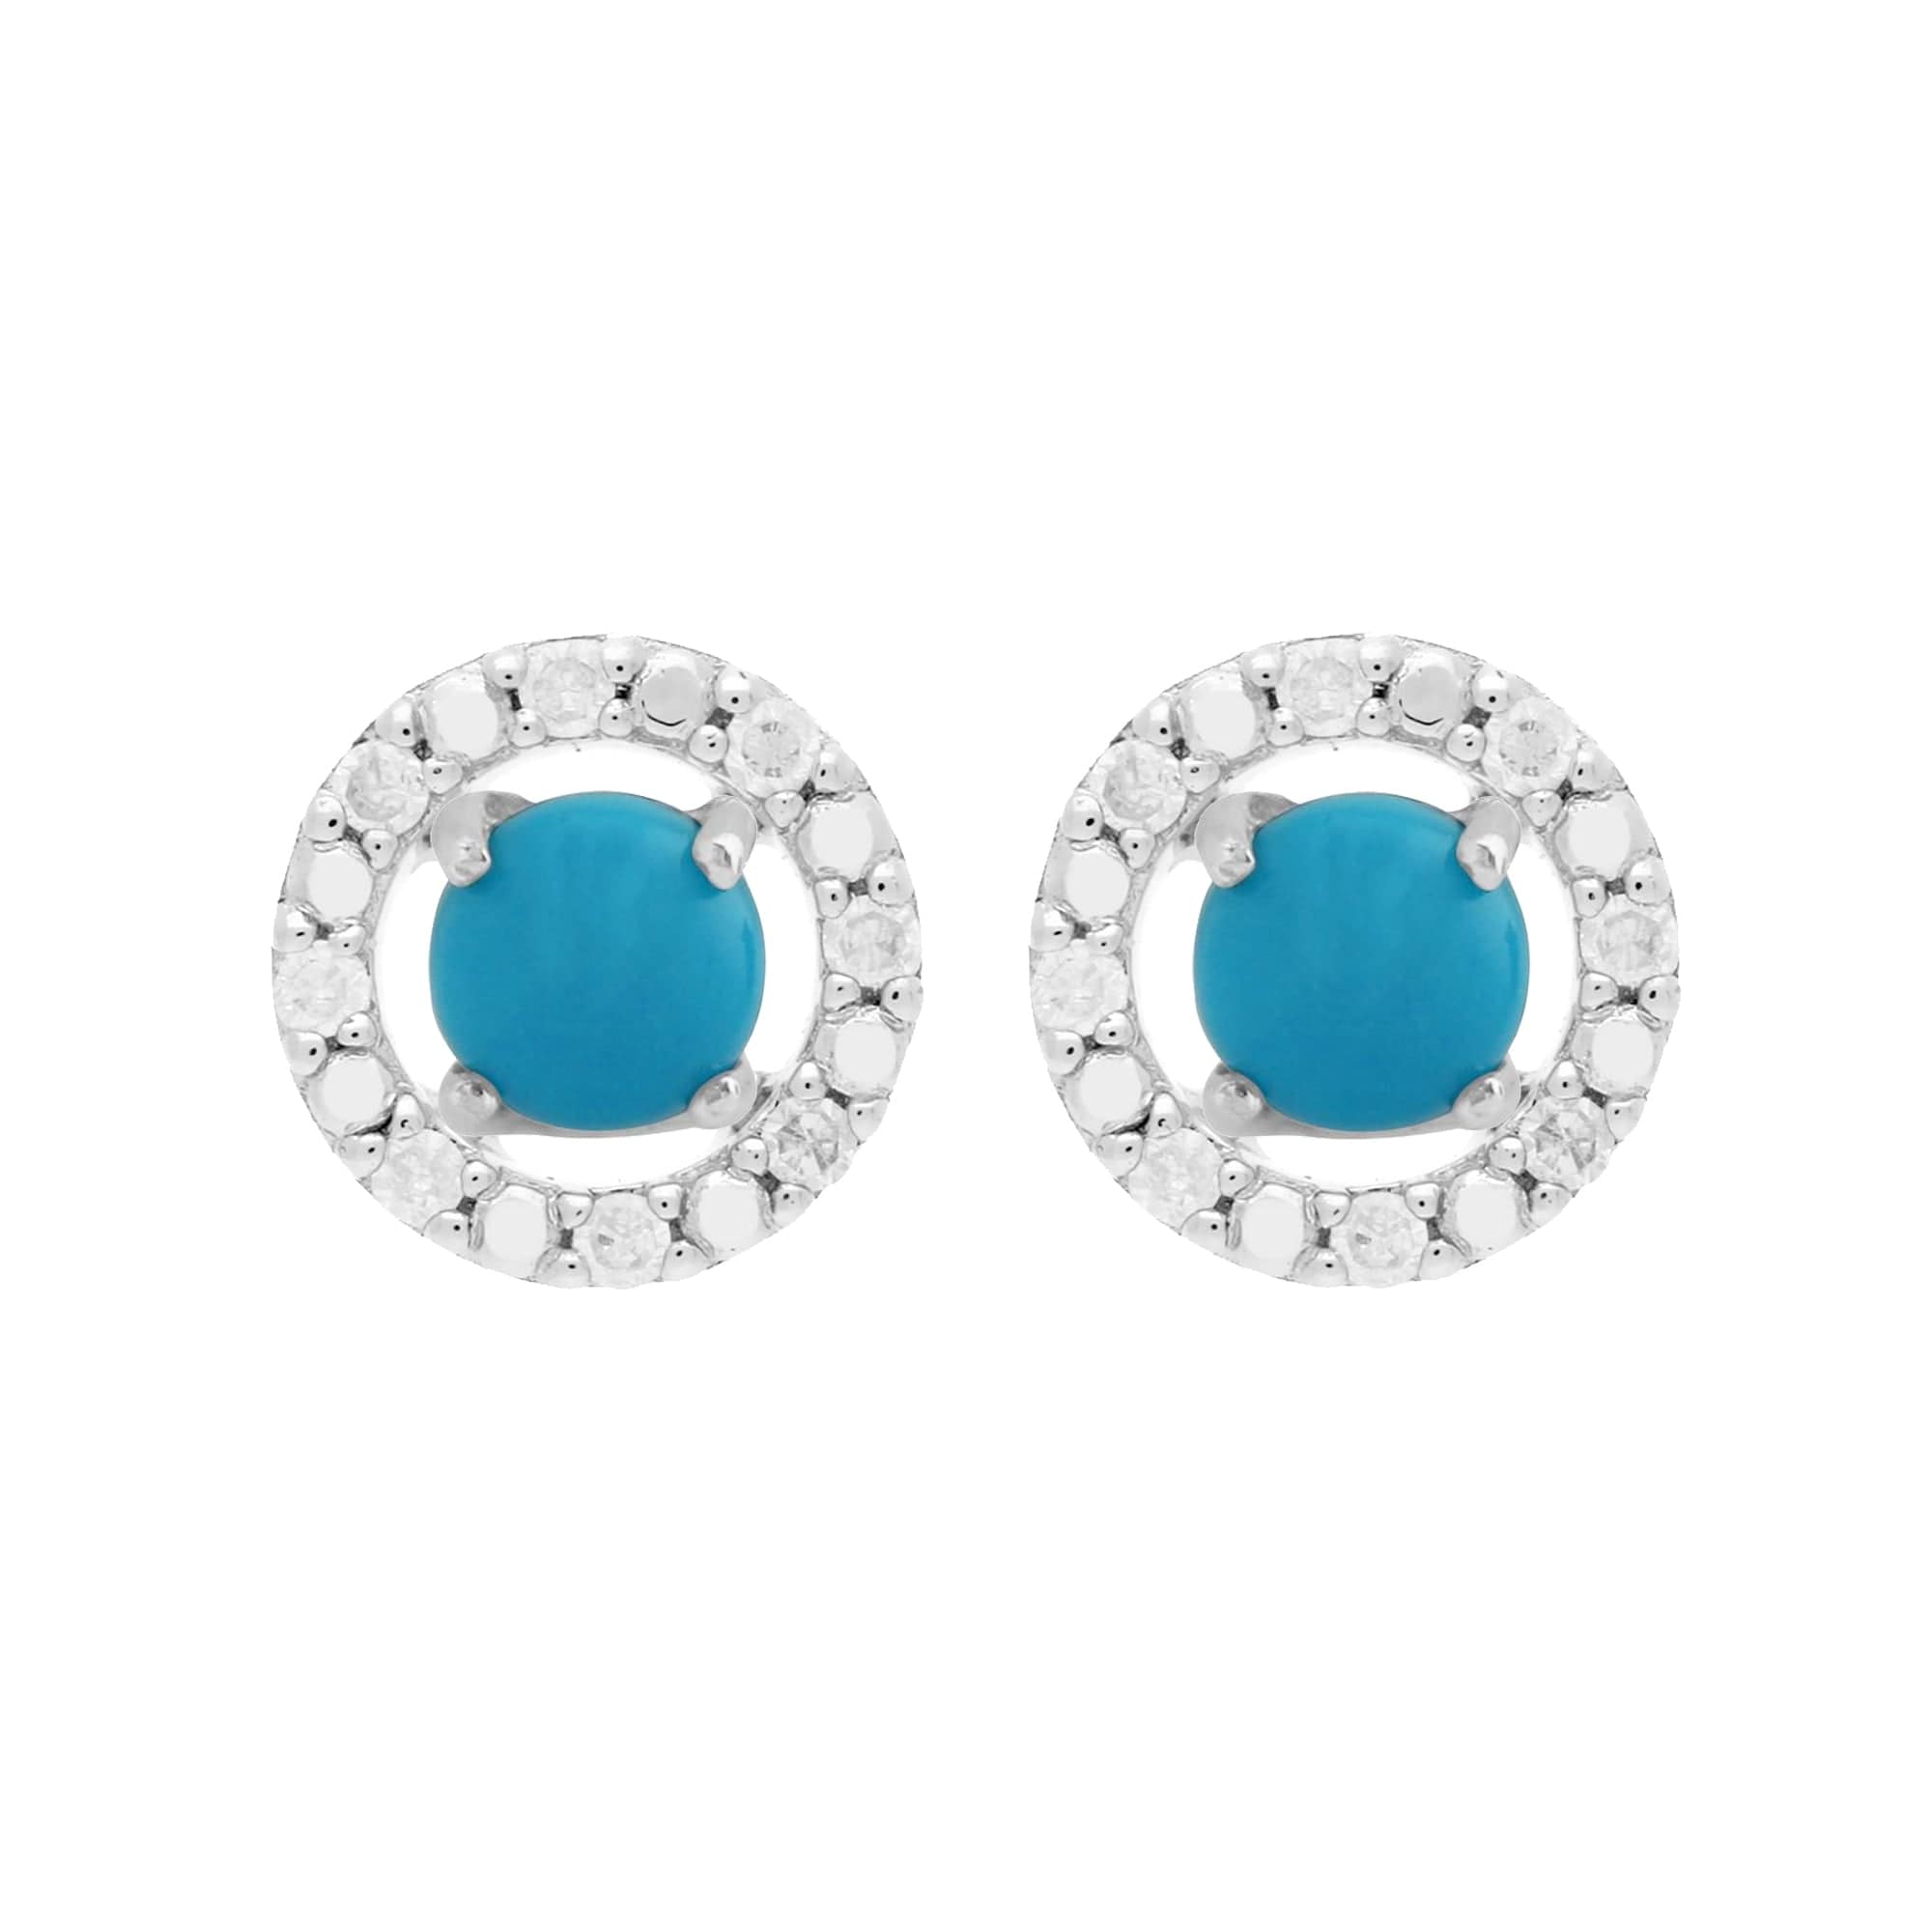 162E0071219-162E0228019 Classic Round Turquoise Stud Earrings with Detachable Diamond Round Ear Jacket in 9ct White Gold 1